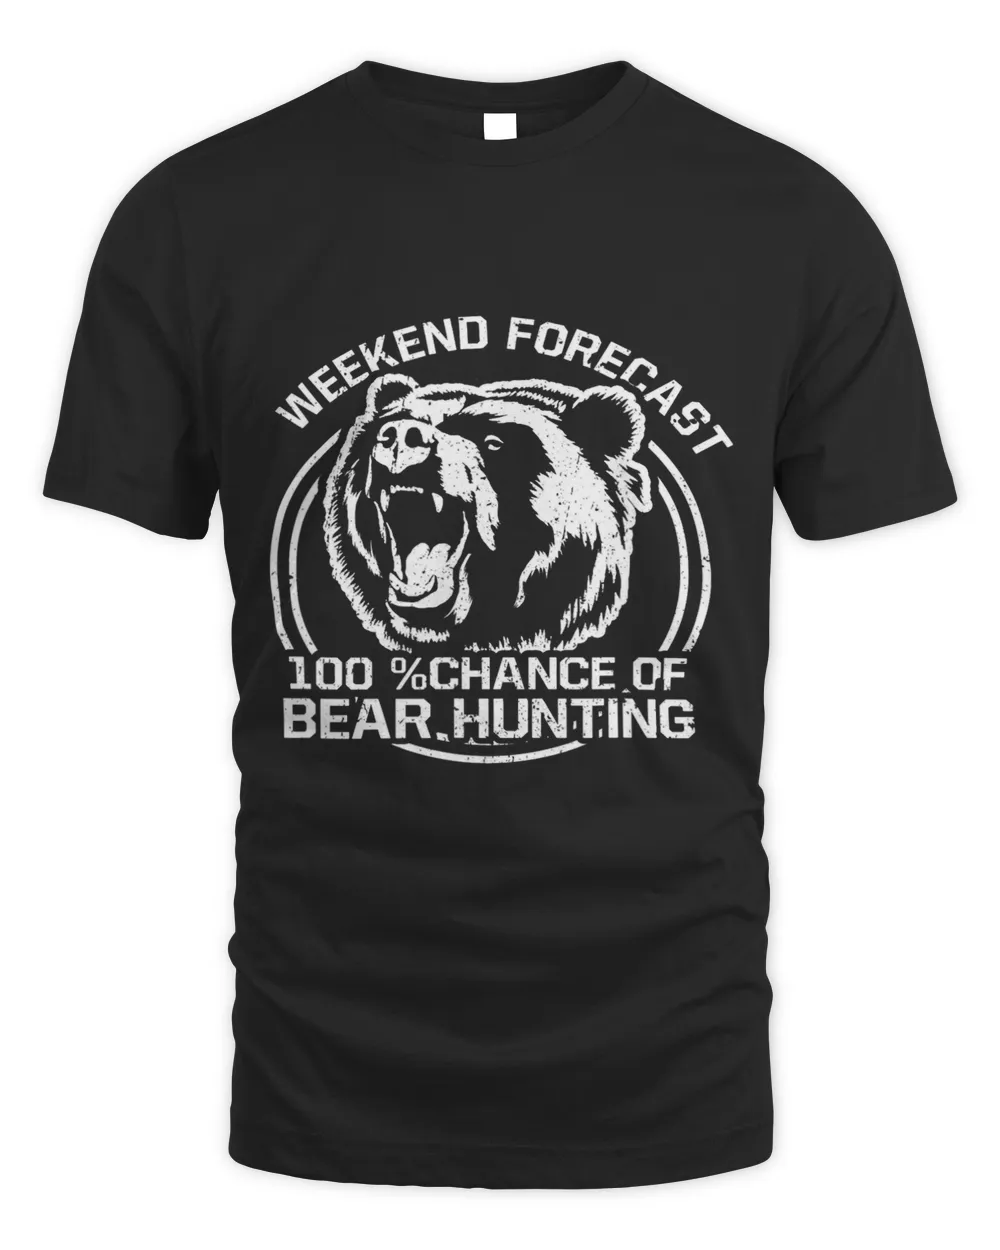 Weekend Forecast 100 Chance Of Bear Hunting Funny Hunter